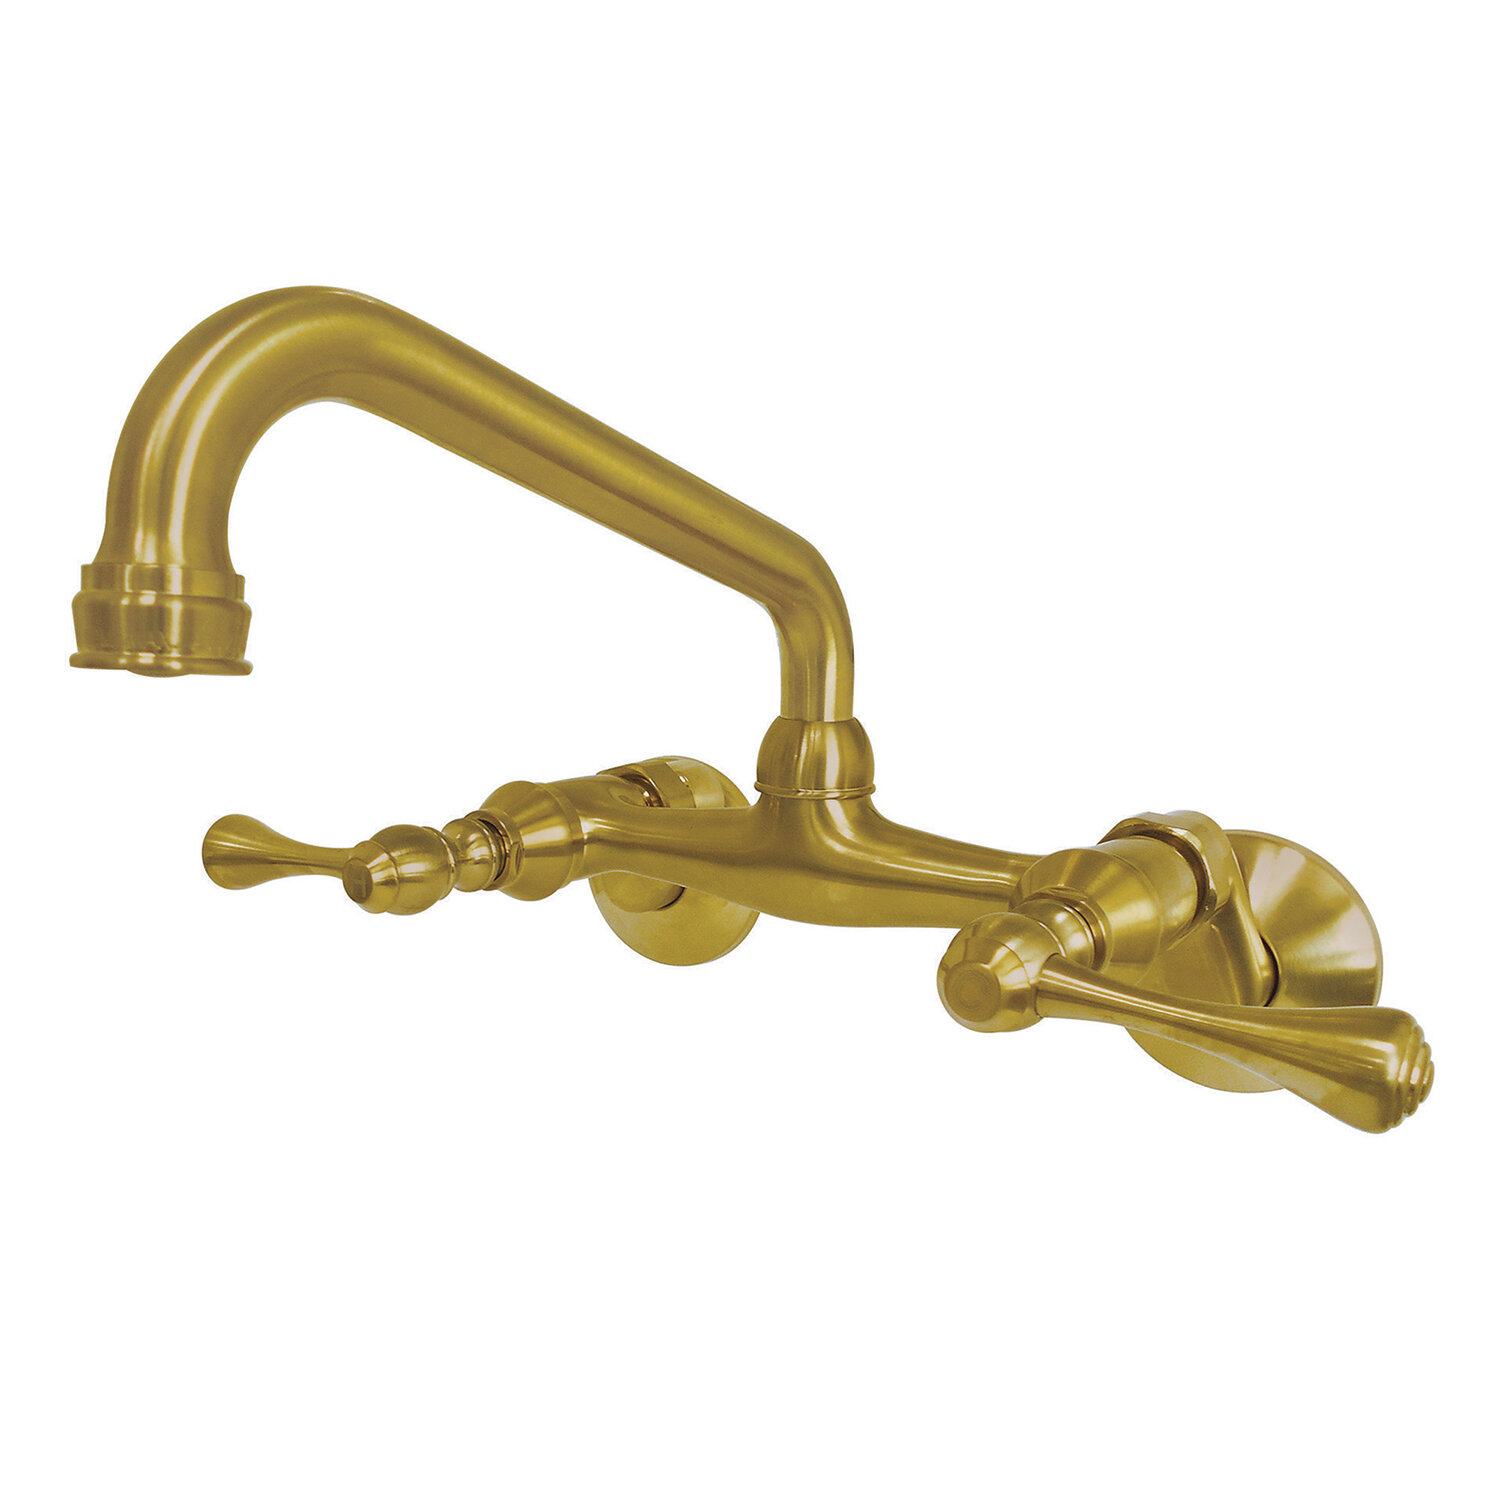 Kingston Brass Kingston Faucet With Accessories & Reviews | Wayfair